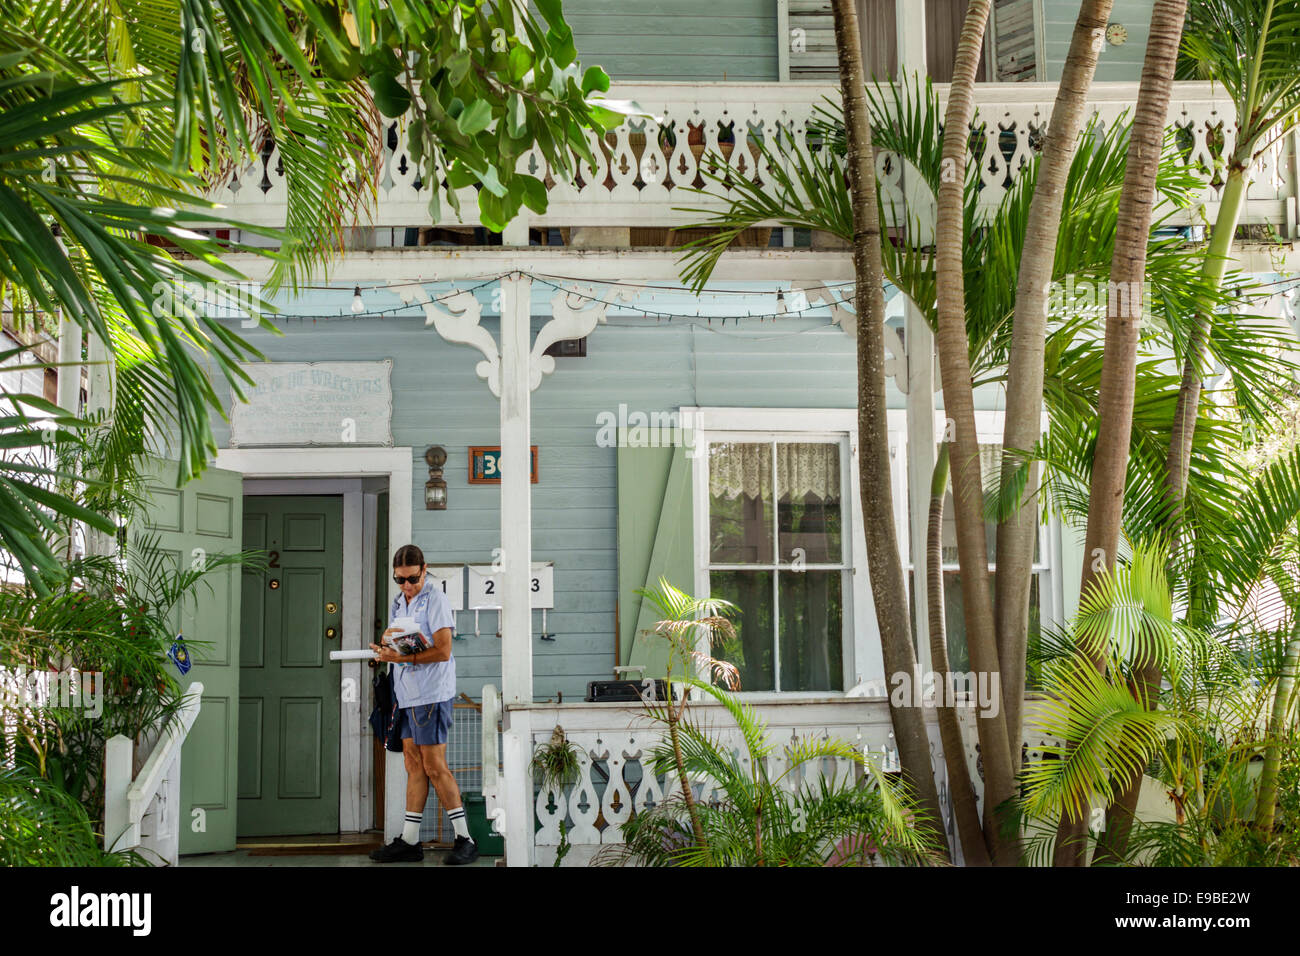 Key West Florida,Keys Whitehead Street,adult adults woman women female lady,mail delivery,postal,tropical landscaping vegetation,plants,trees,visitors Stock Photo